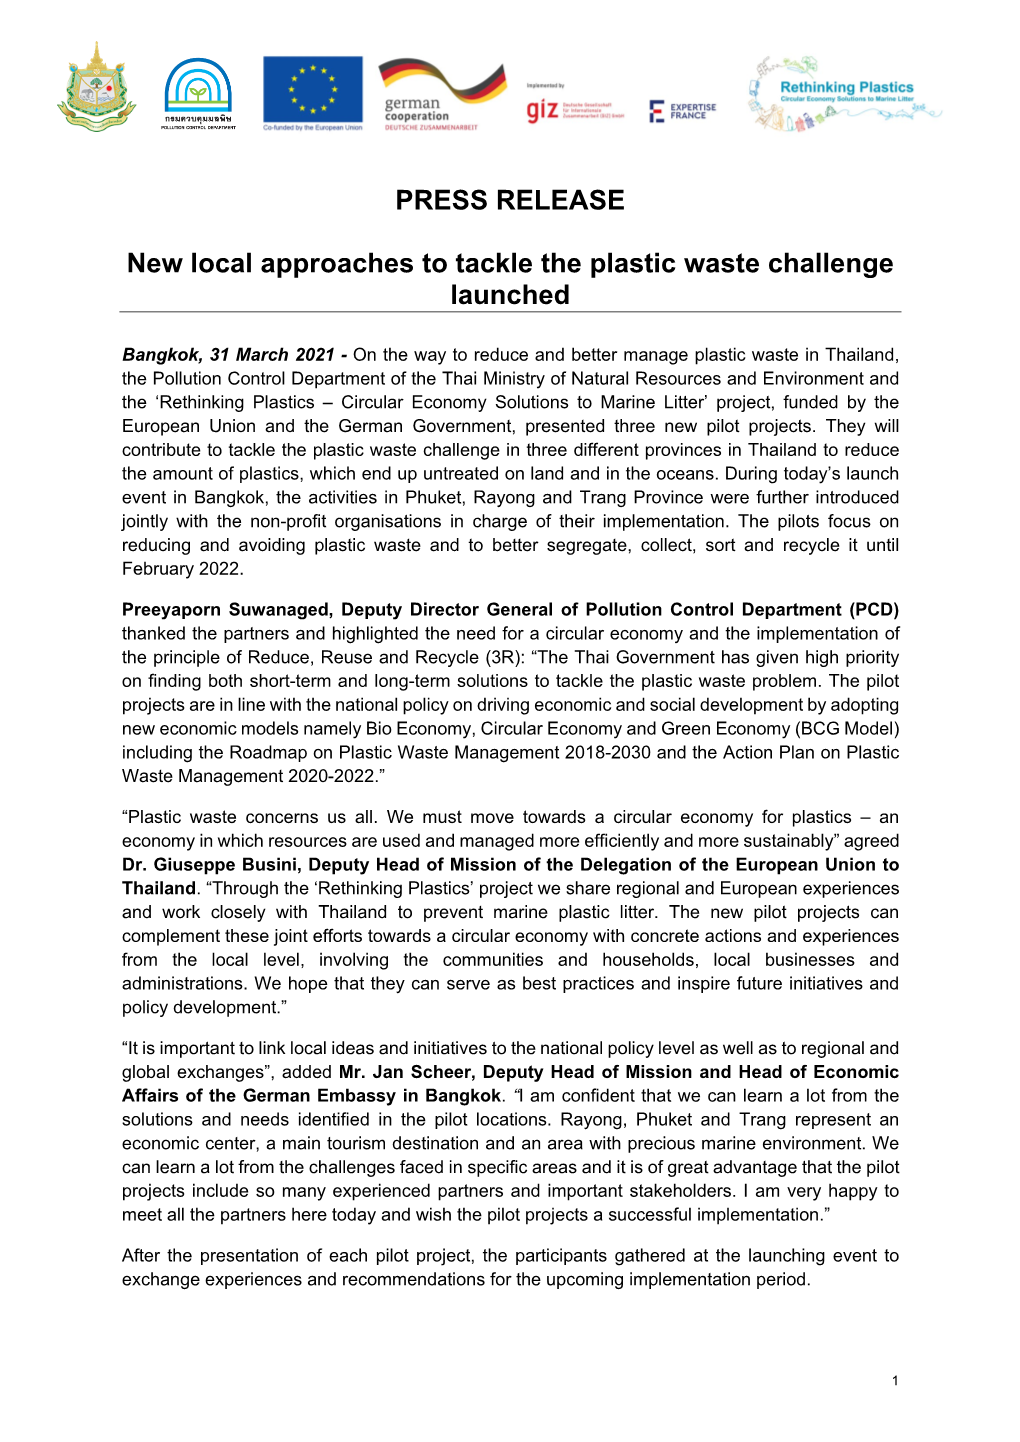 PRESS RELEASE New Local Approaches to Tackle the Plastic